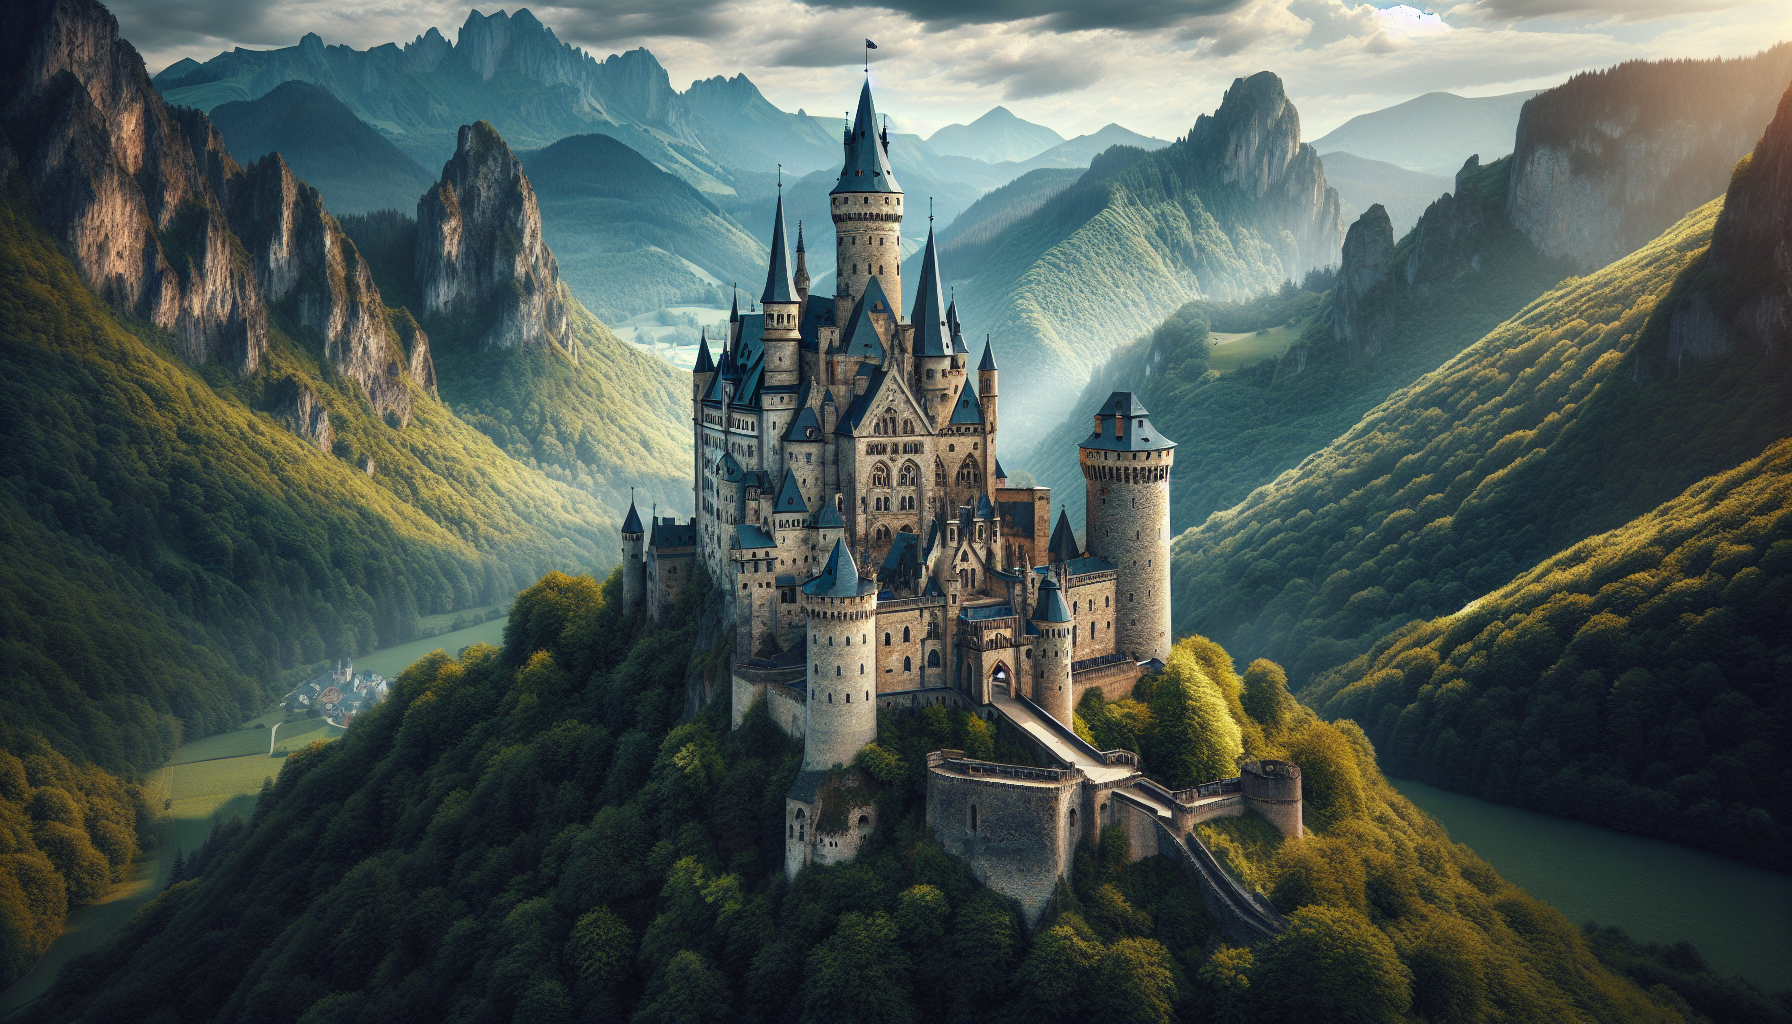 Europe is home to some of the world’s greatest castles